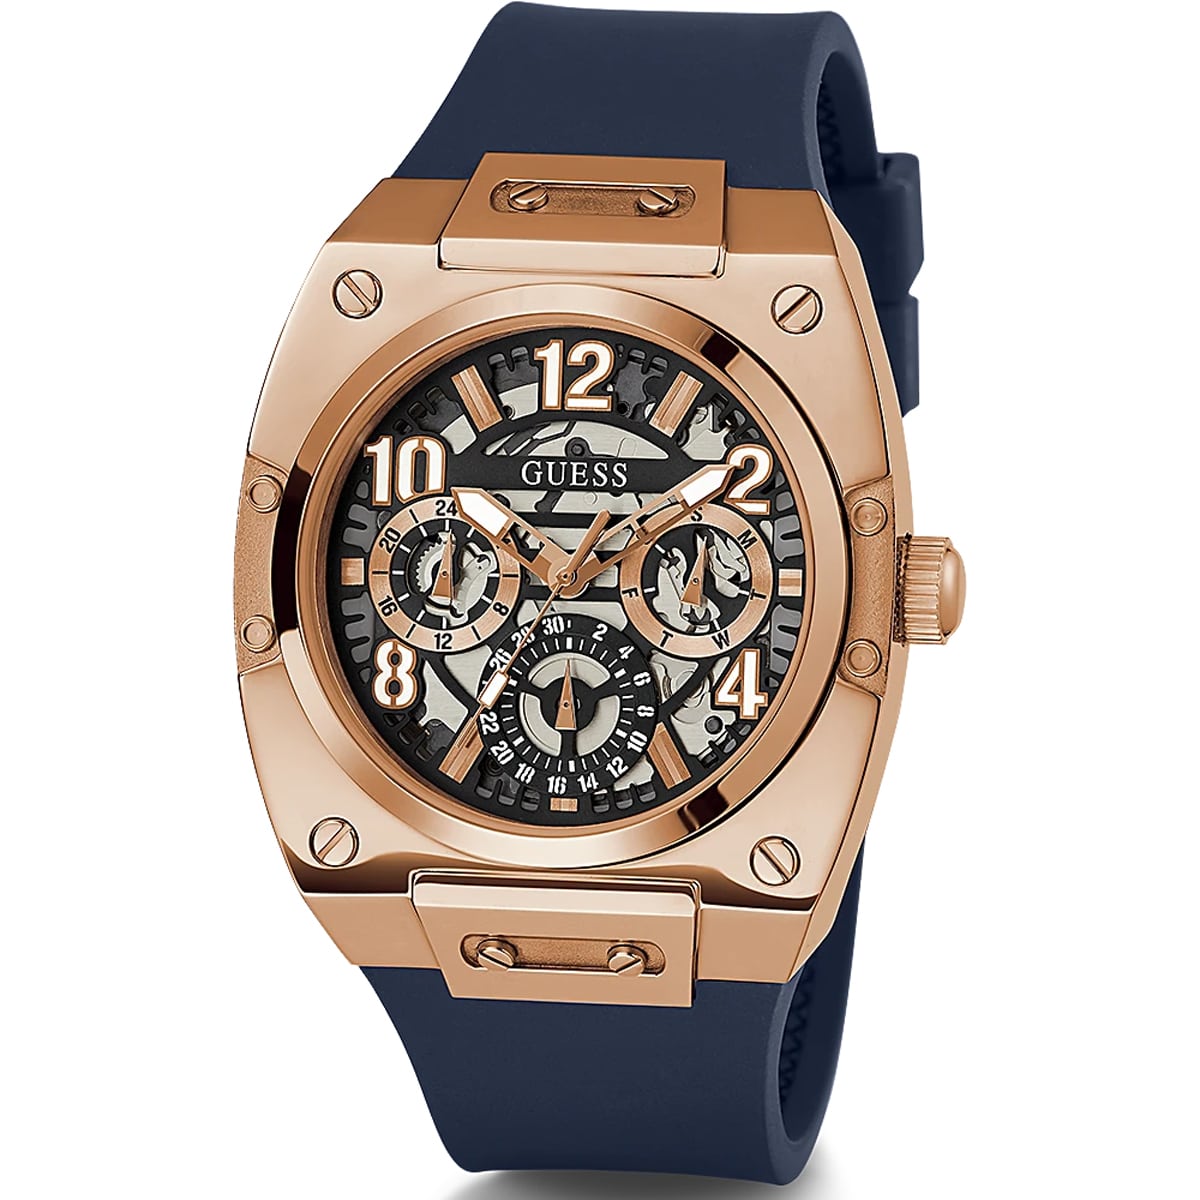 MONTRE GUESS PRODIGY HOMME M.FONCTION SILICONE